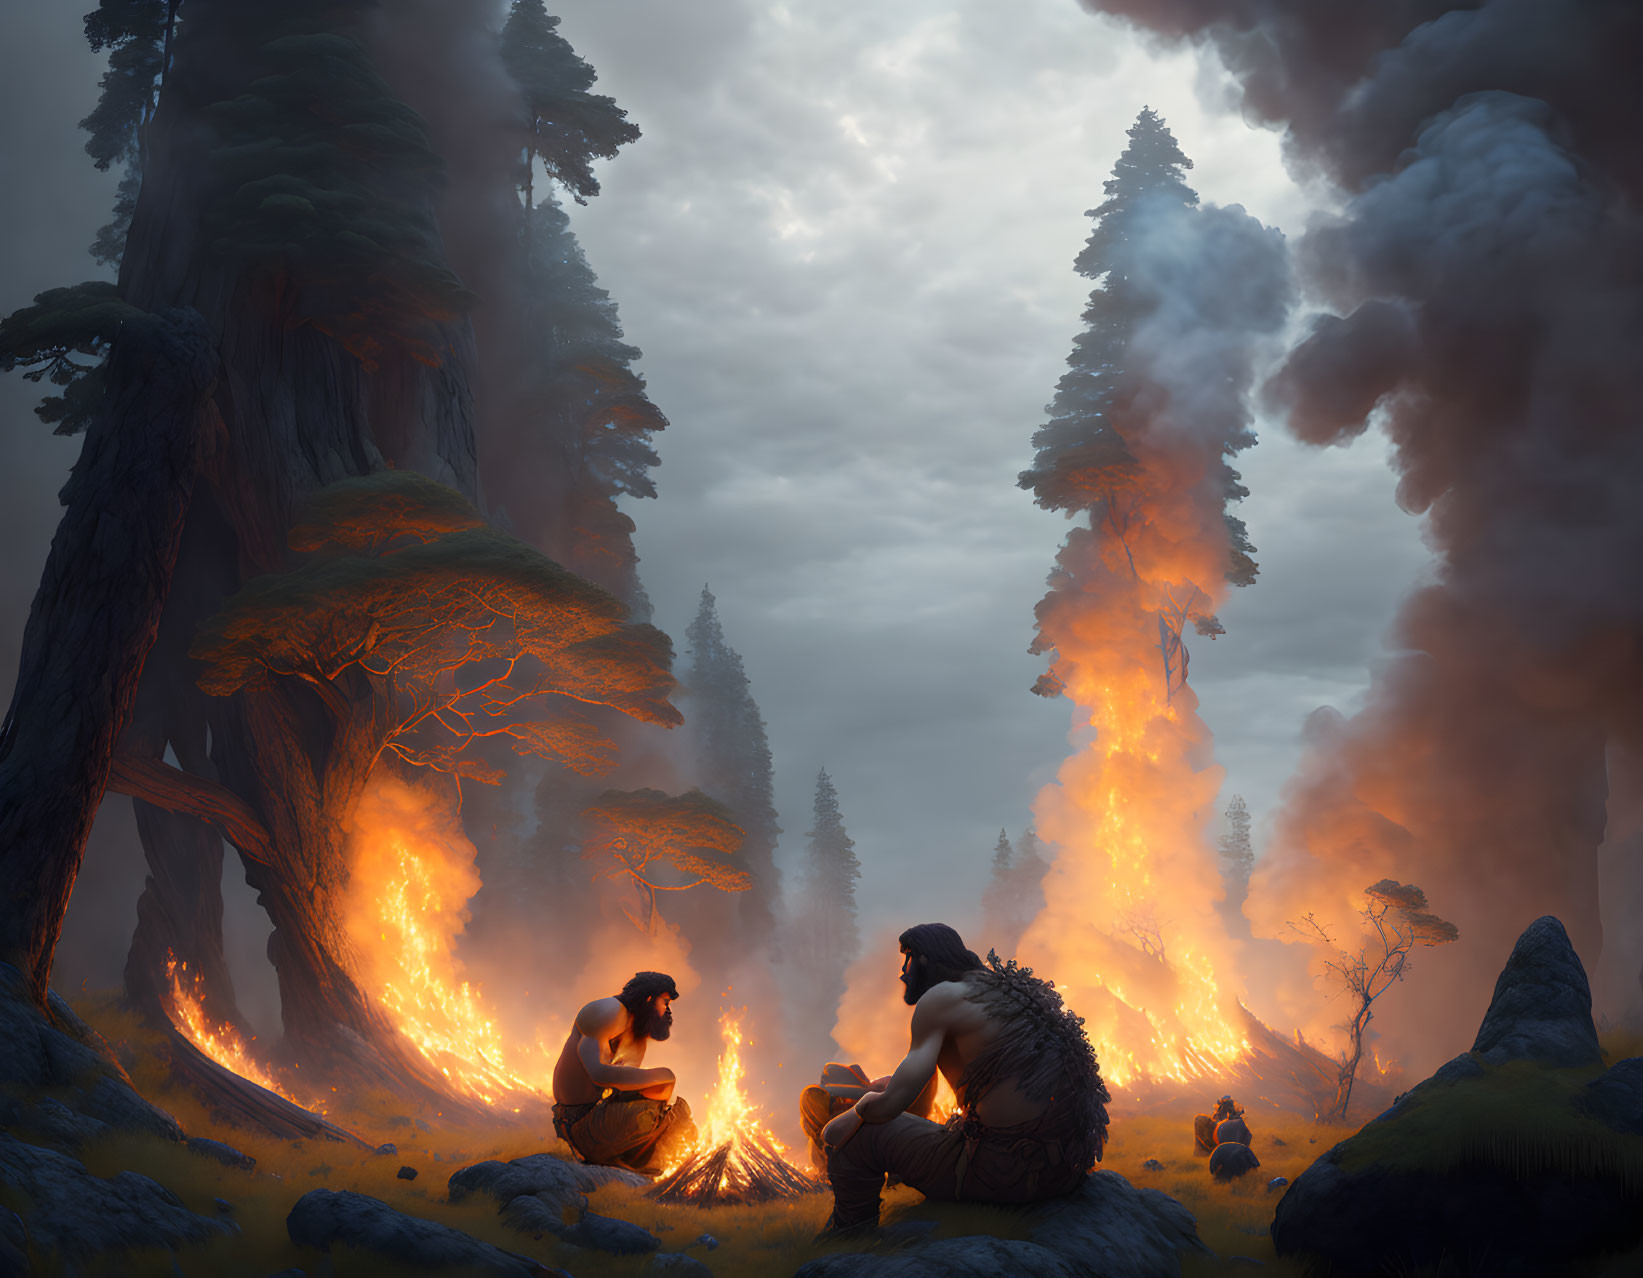 Two people at campfire in forest with wildfire smoke.